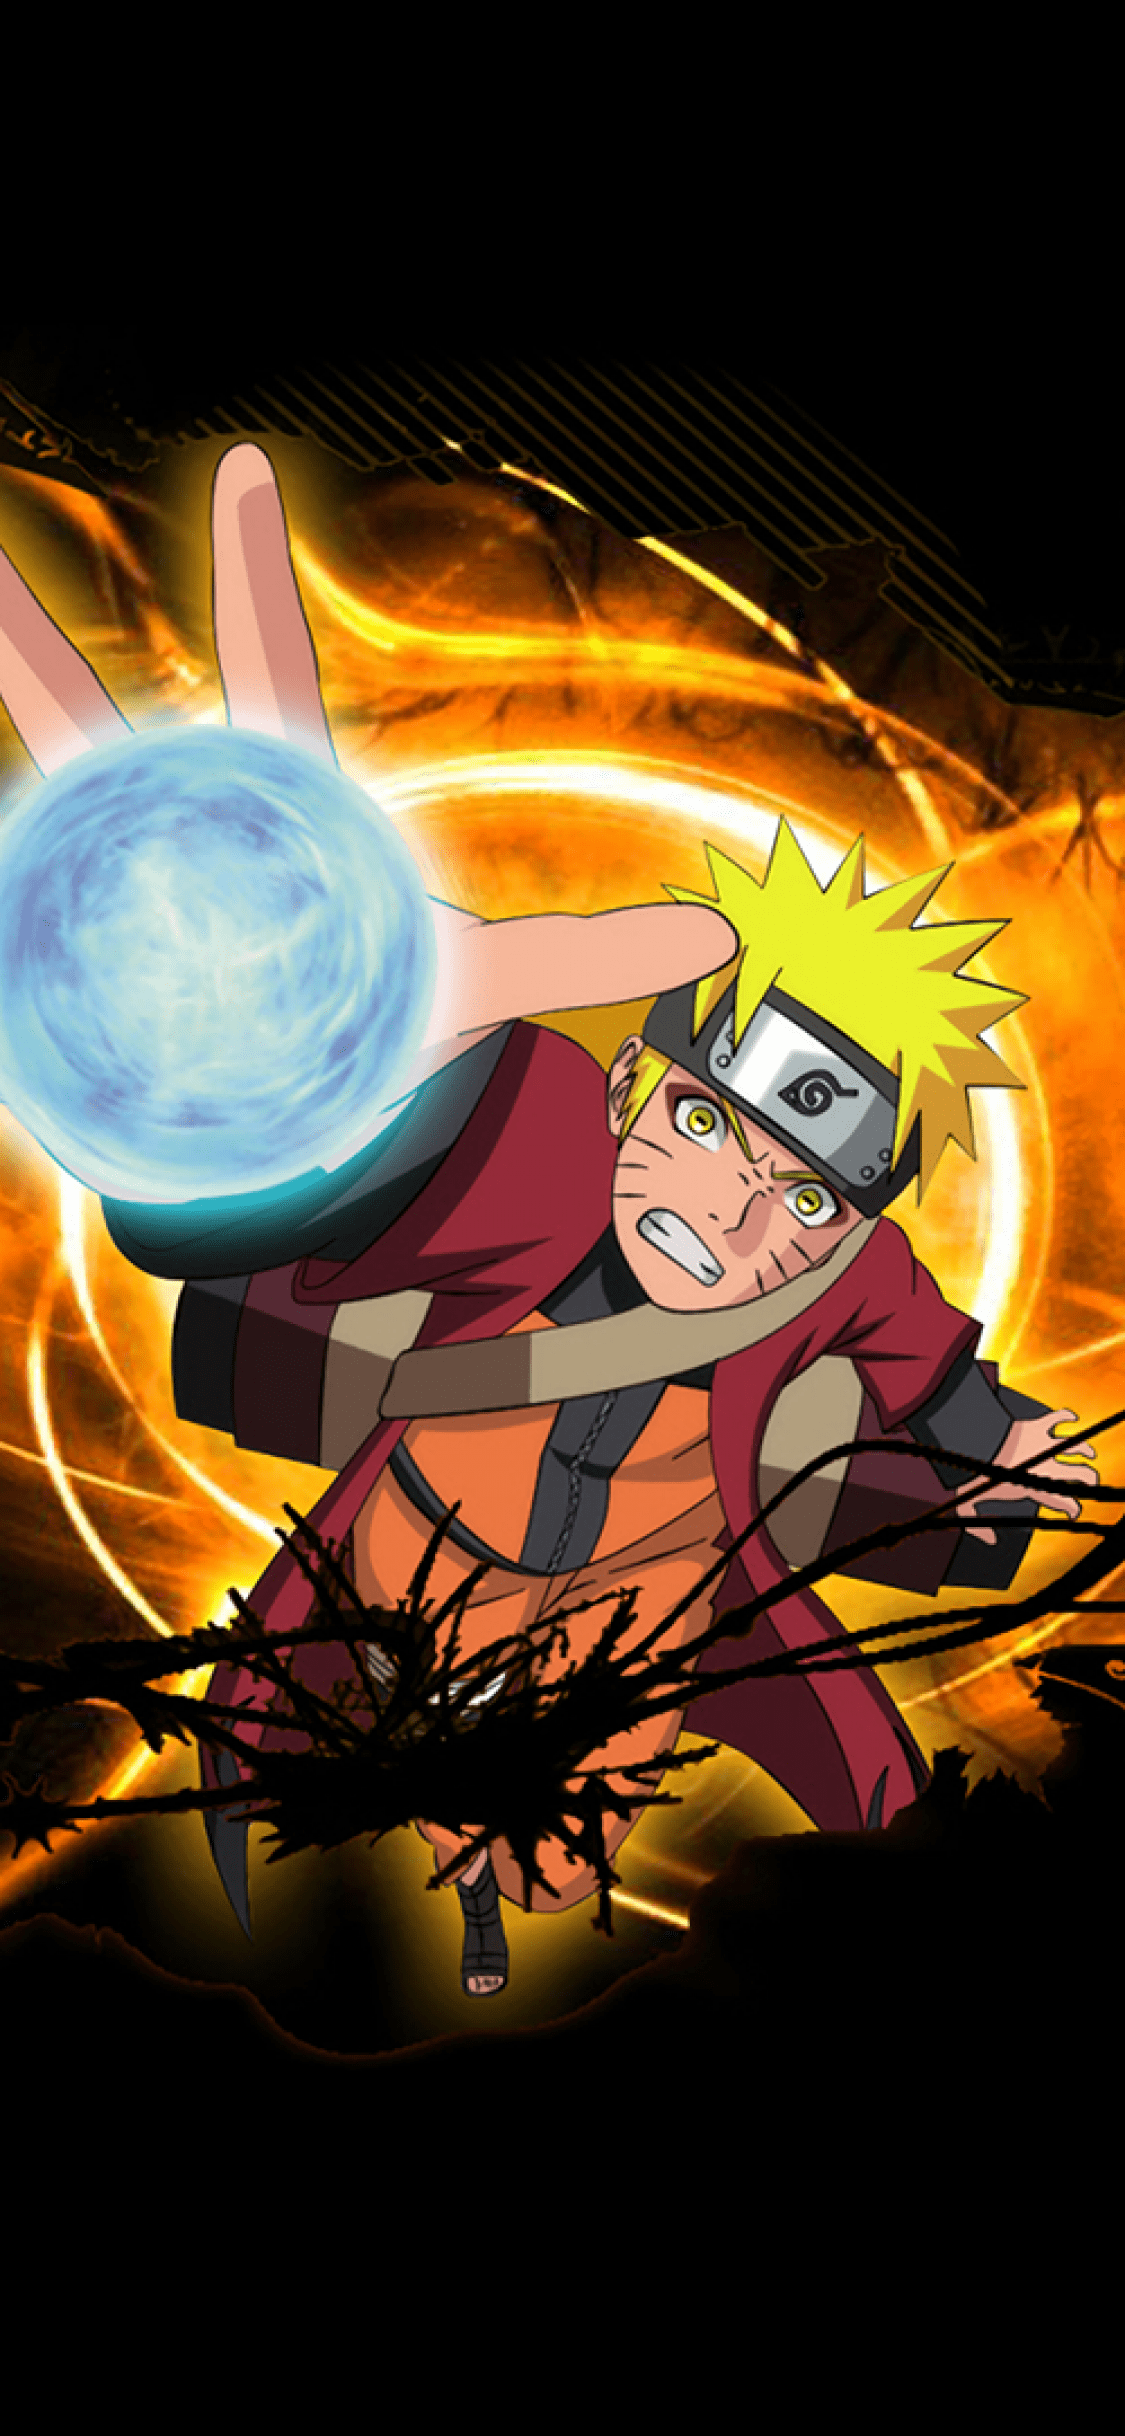 Some Naruto iPhone wallpapers : r/iphonewallpapers